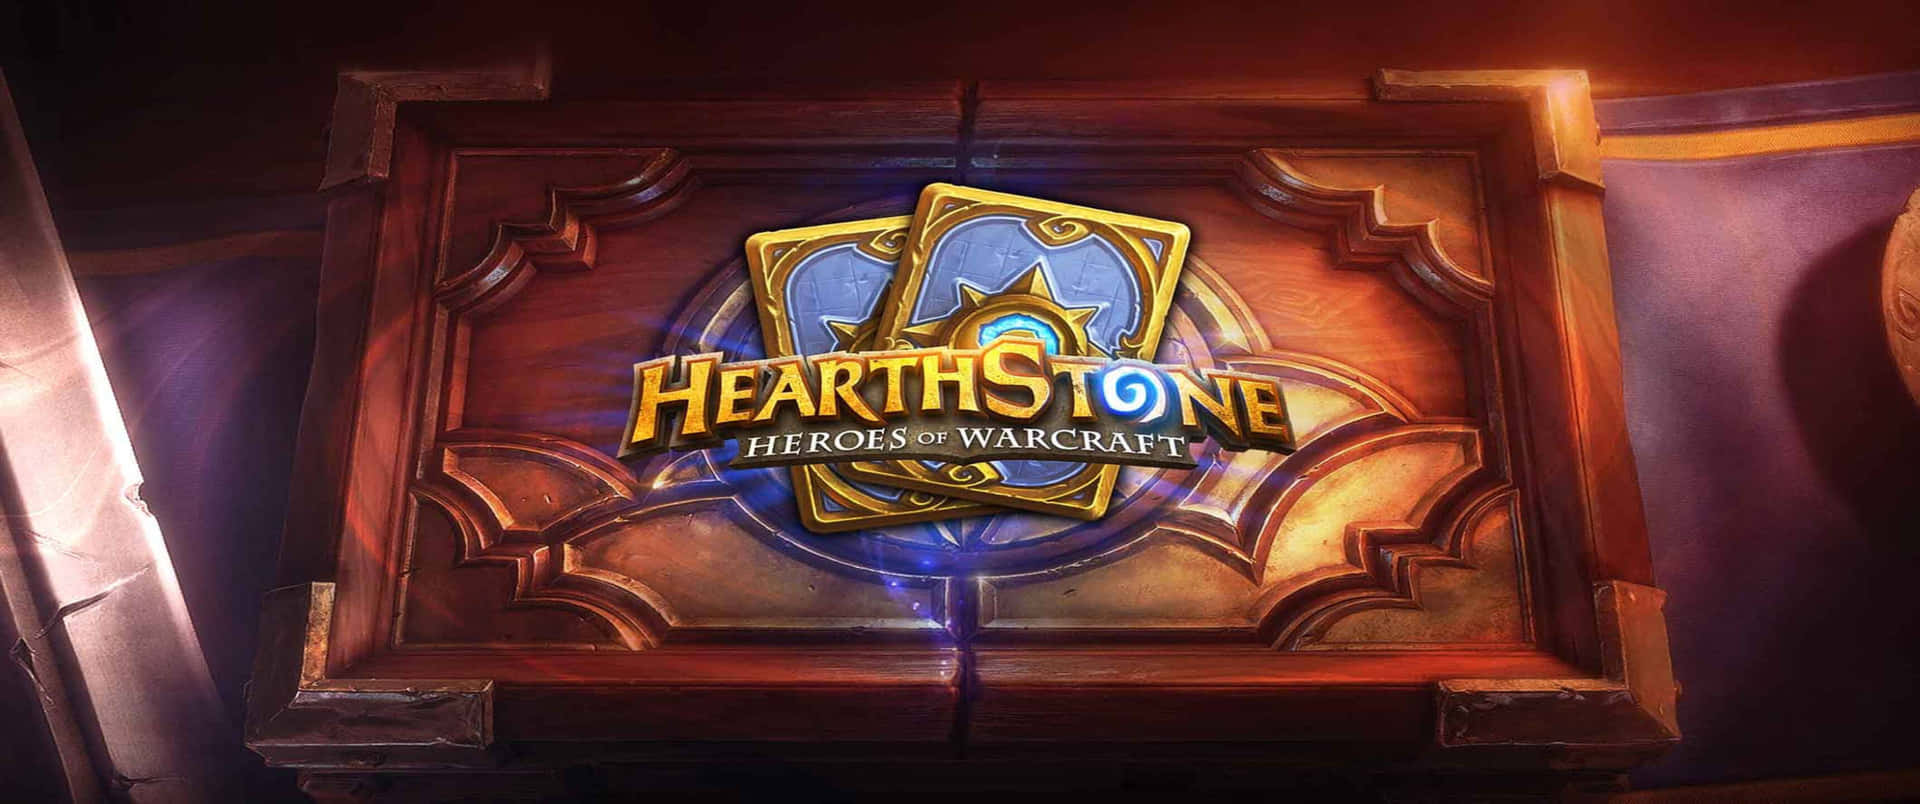 Summon your best minions and play Hearthstone at 3440x1440p!